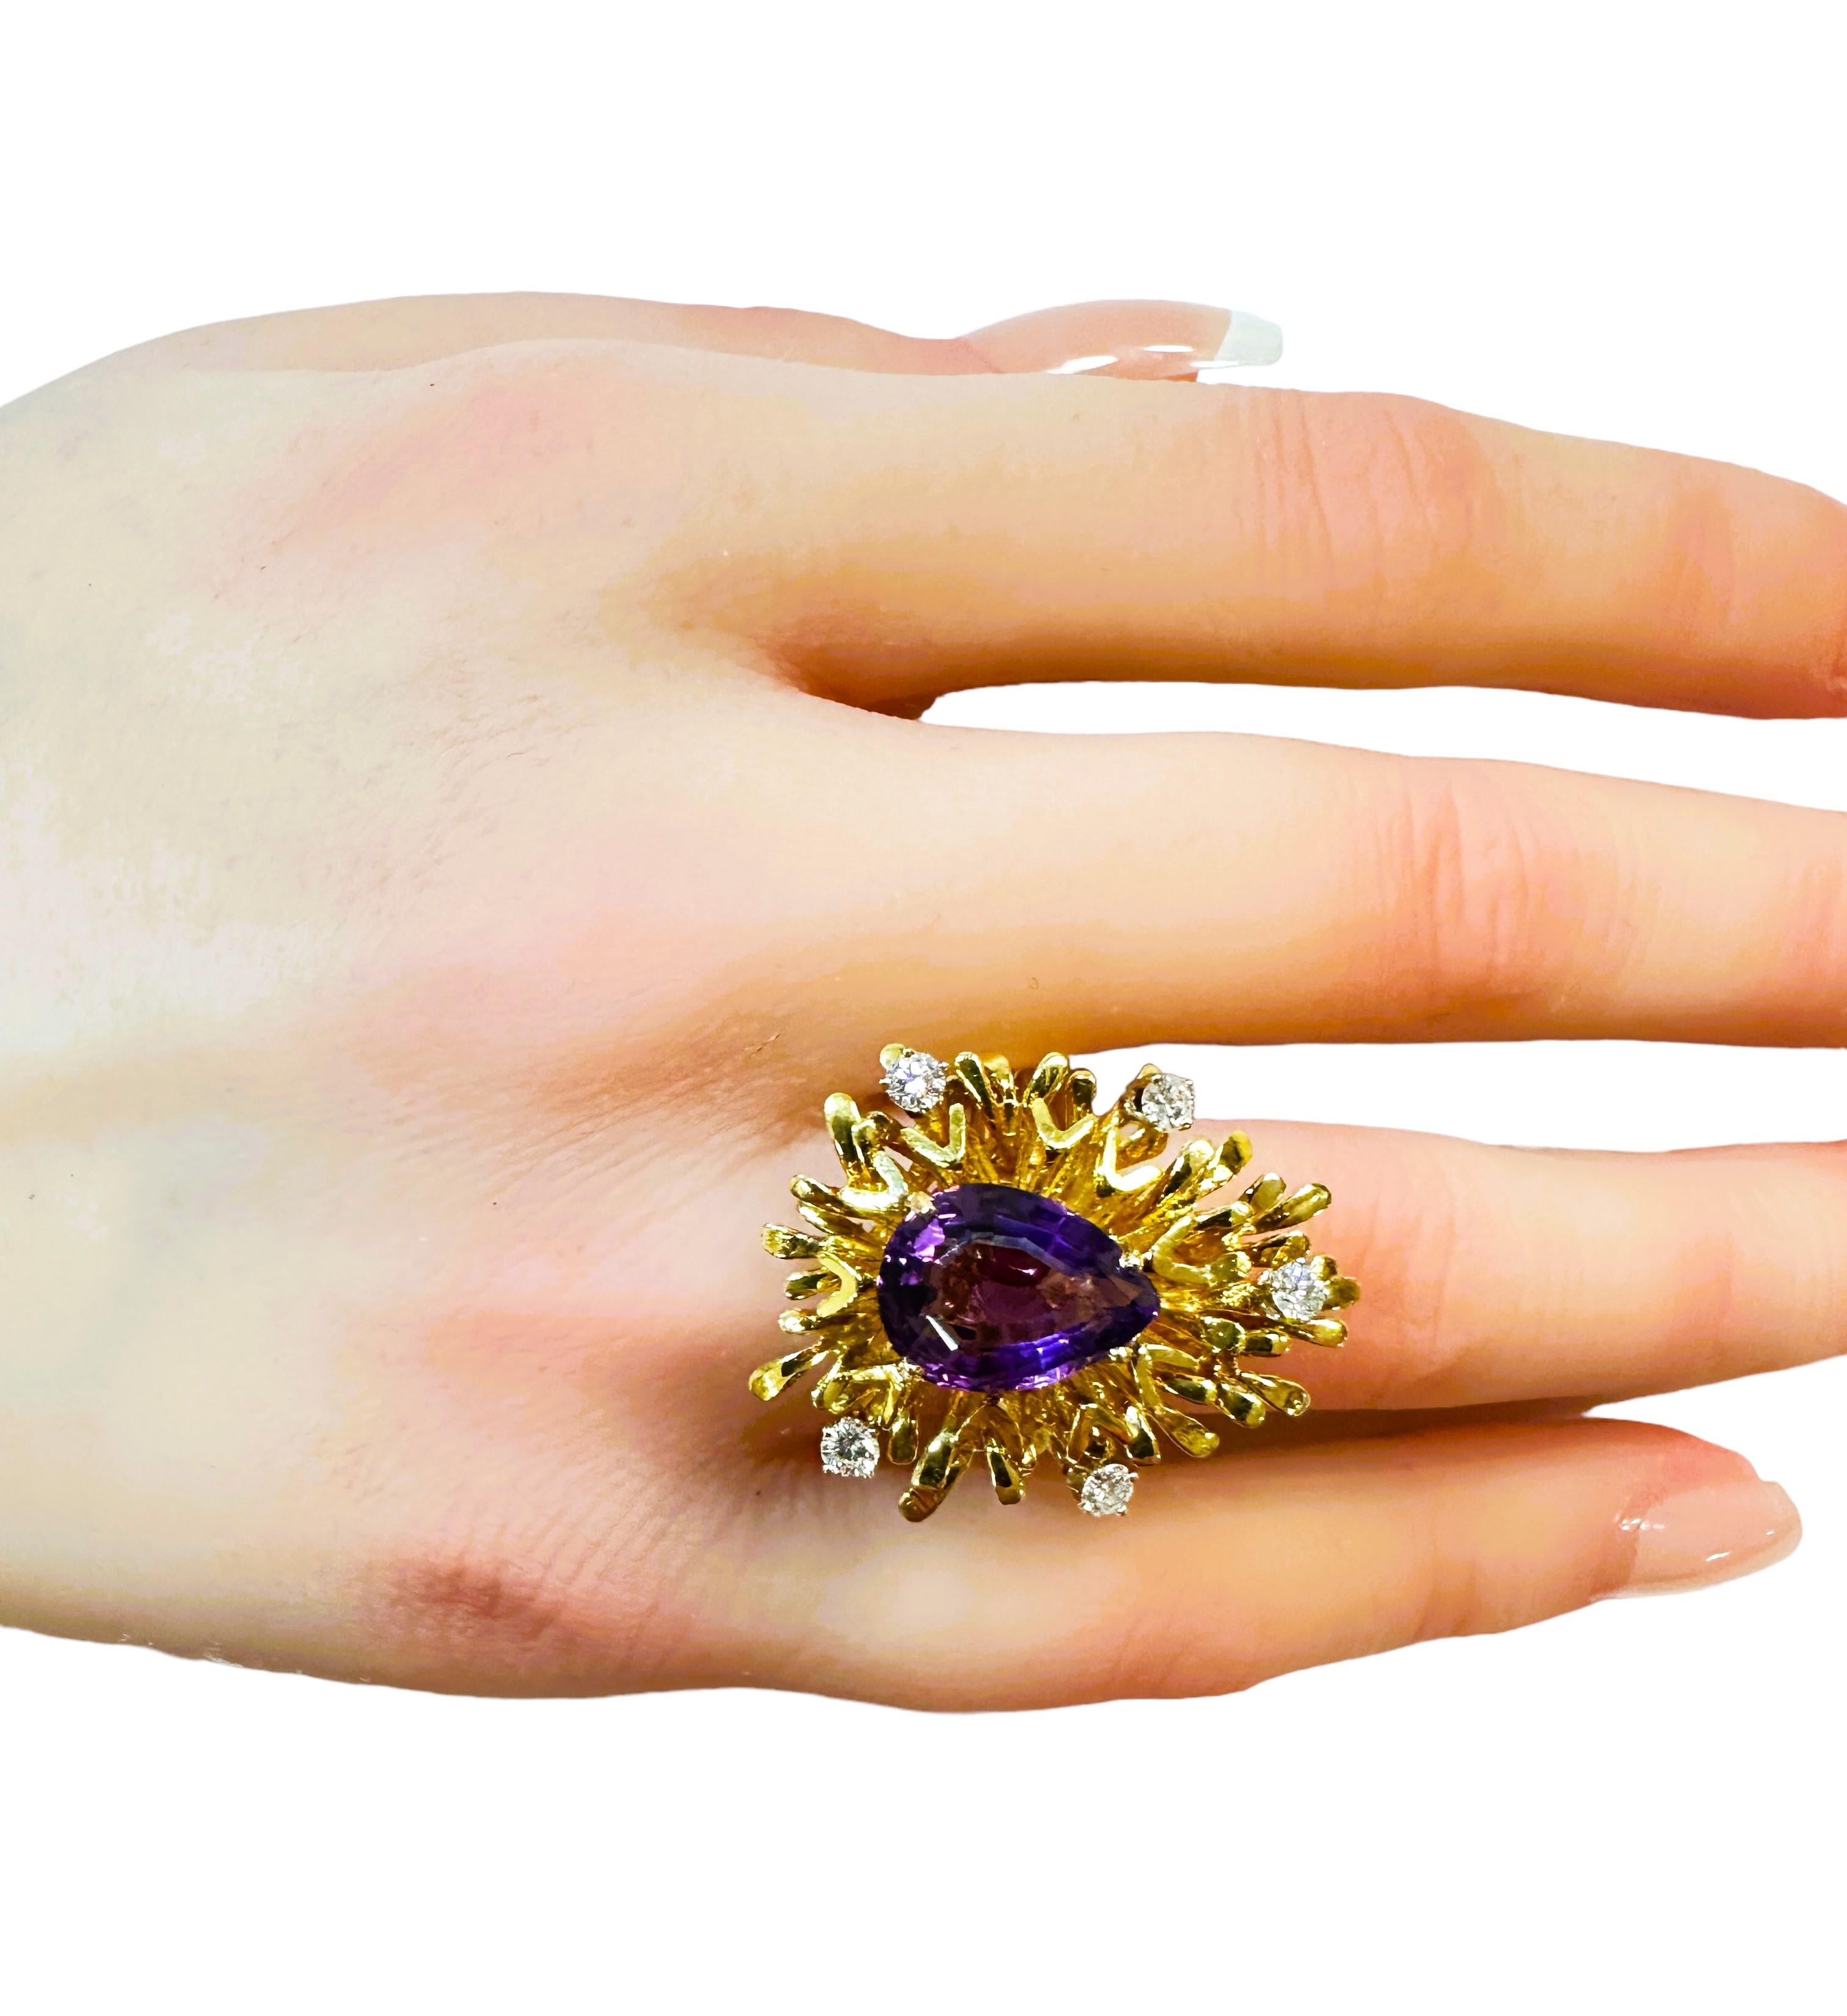 18K YG 4 Ct Amethyst & .25 Ct Diamond Ring Size 7.25 with Appraisal For Sale 2